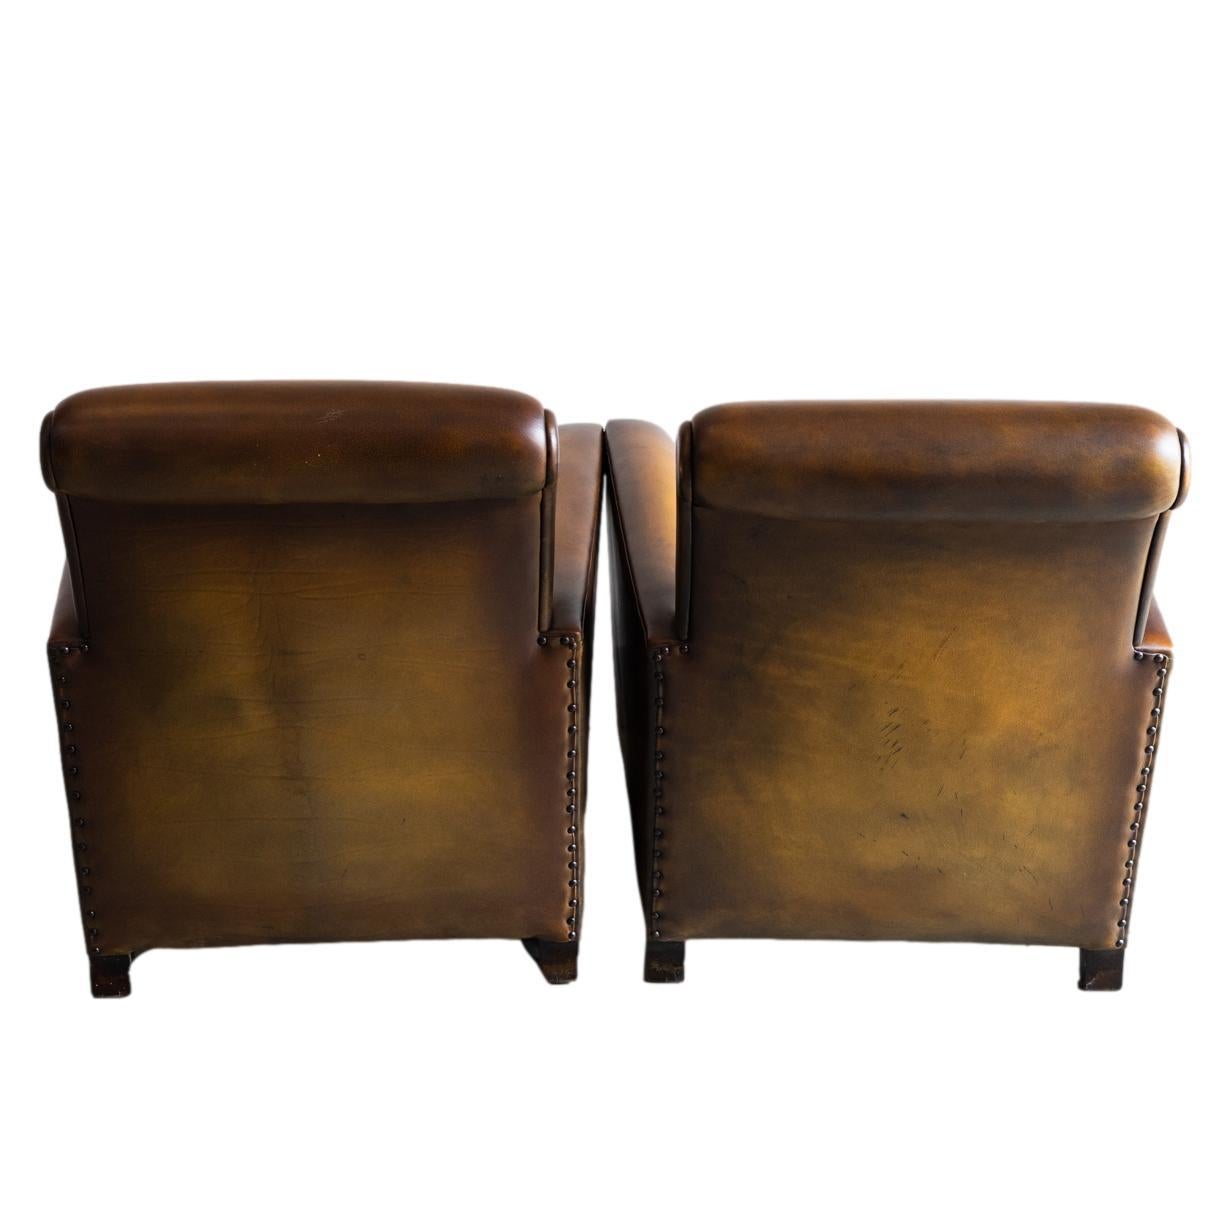 A Pair of Art Deco Leather Club Chairs, French, ca. 1935 For Sale 1